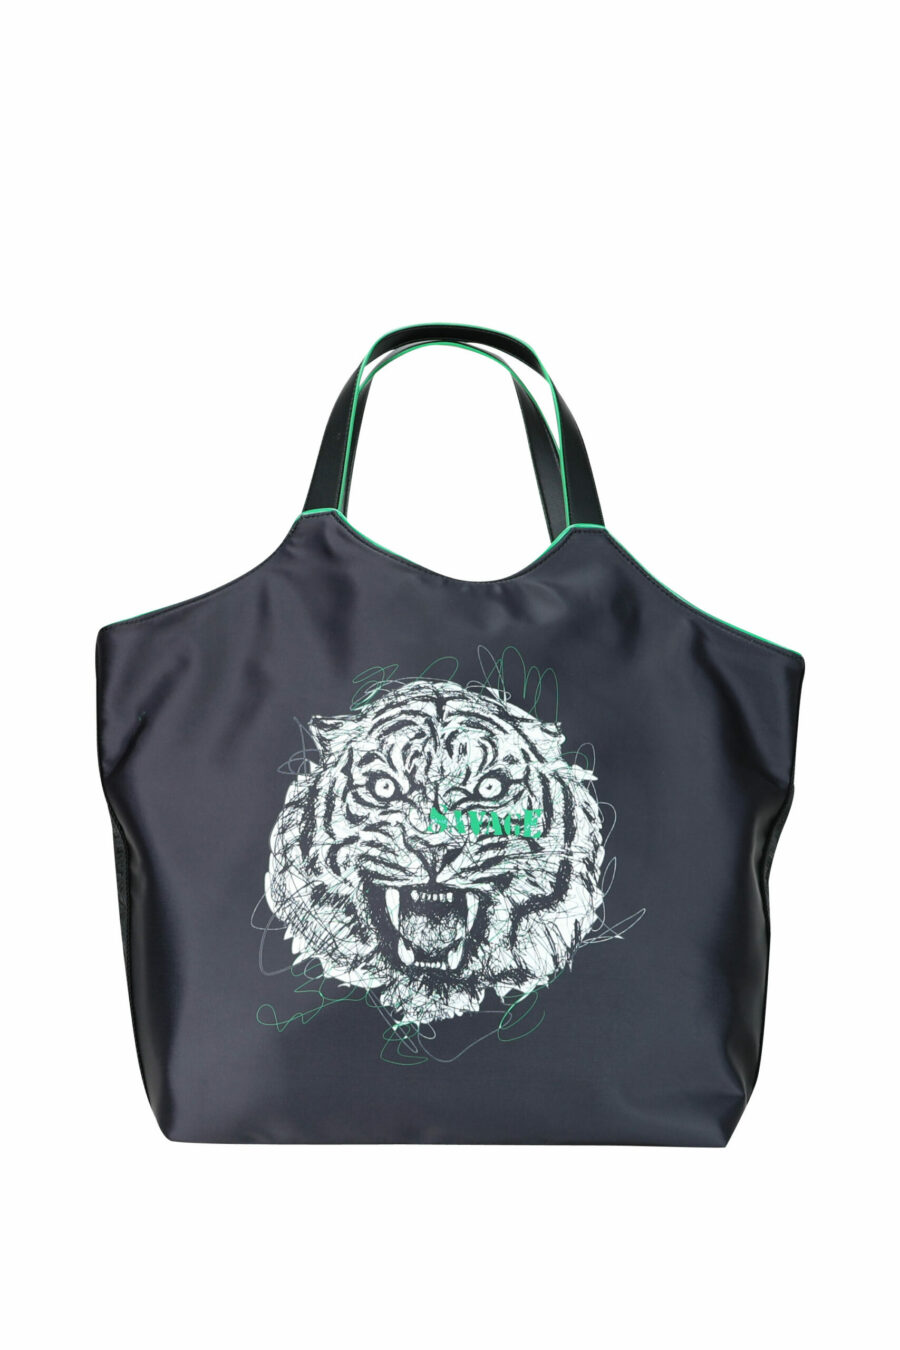 Tote bag black with green tiger maxilogo - 8052672642288 1 scaled